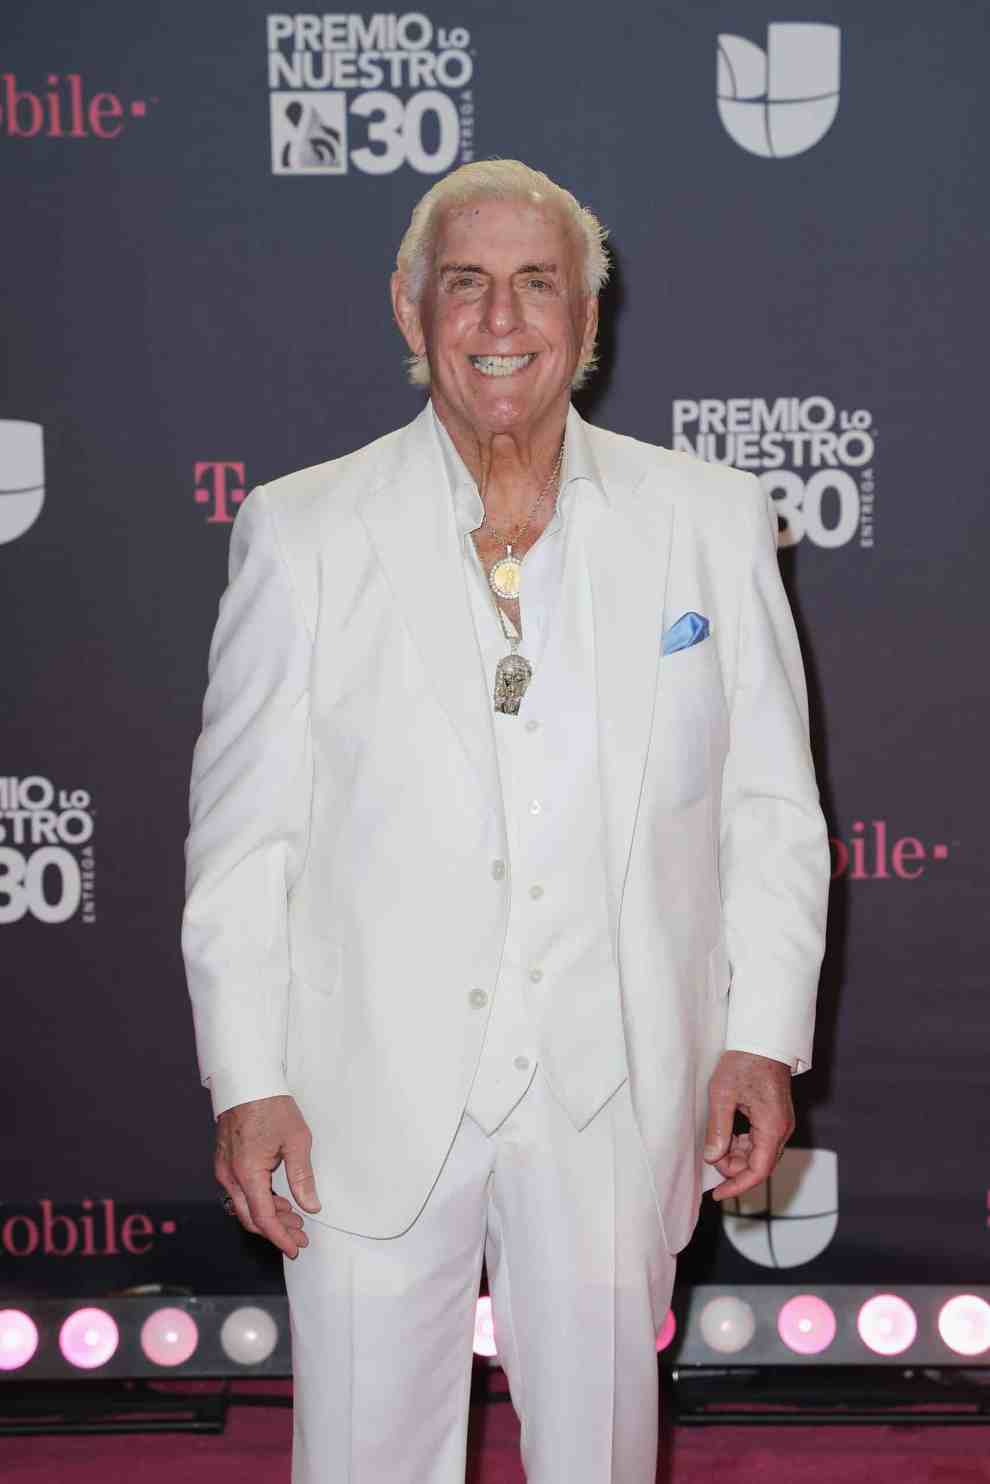 Ric Flair wearing all white